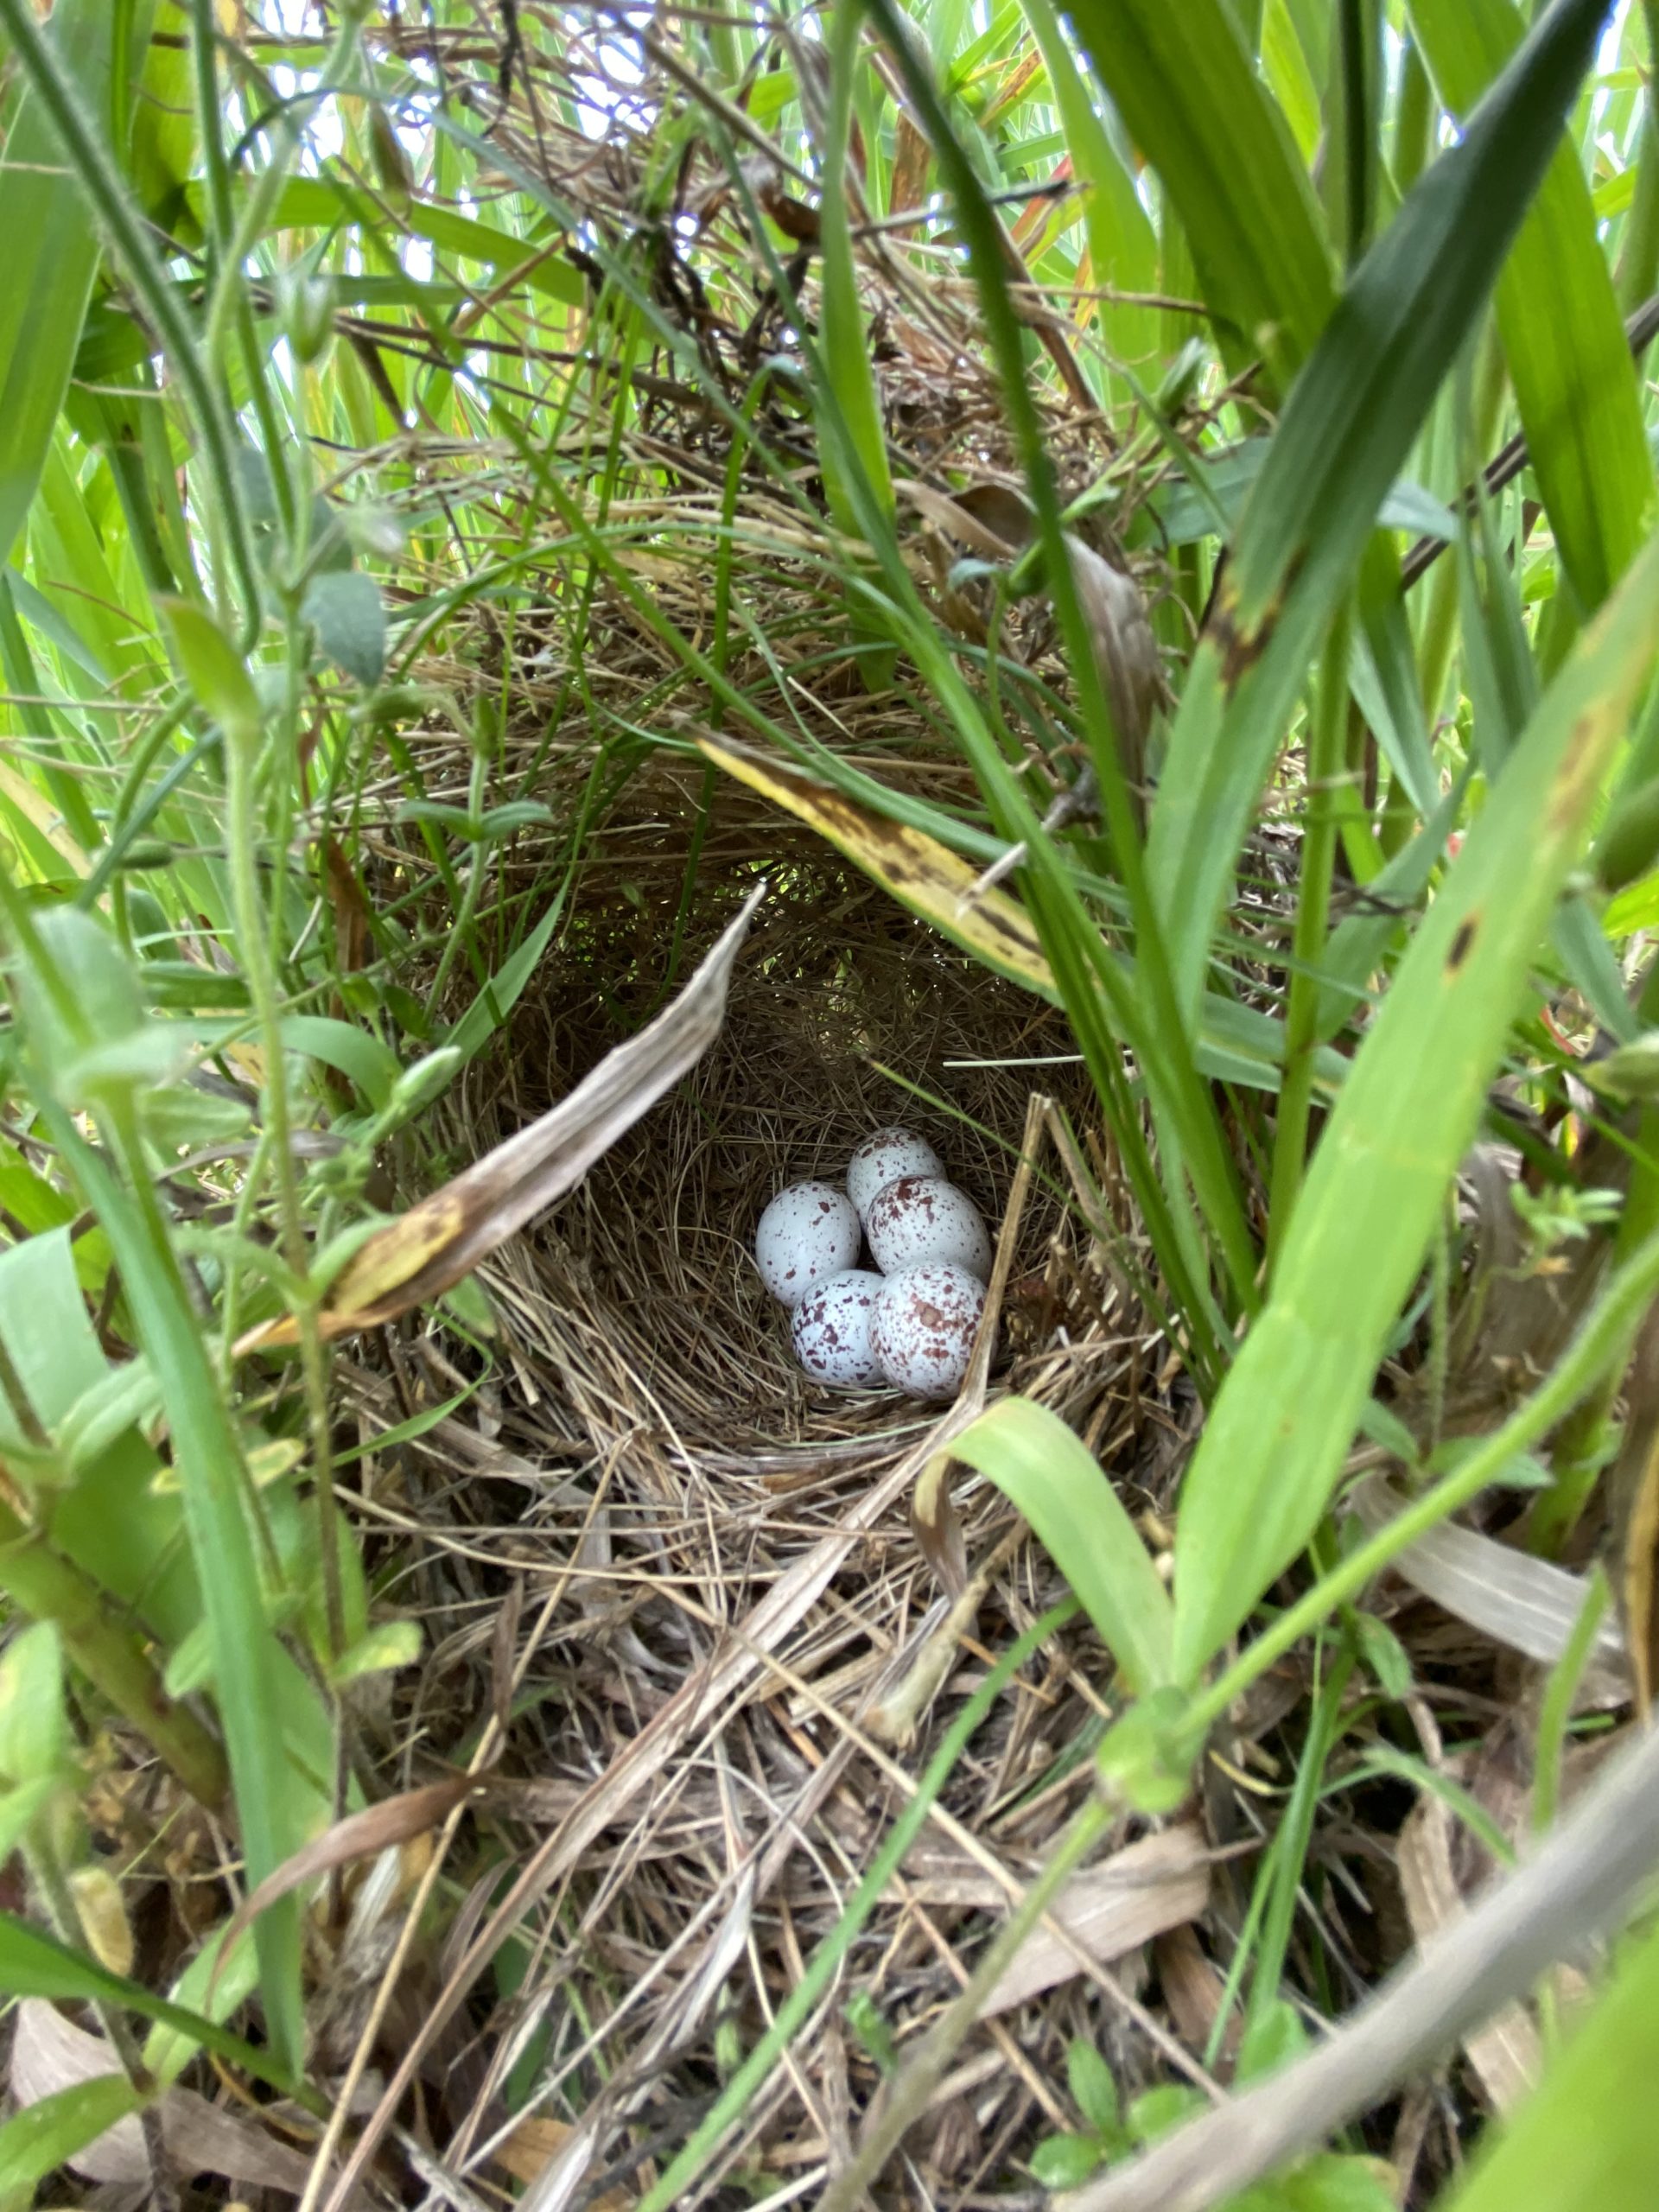 bird eggs in a nest made from hay, sheltered in tall grasses